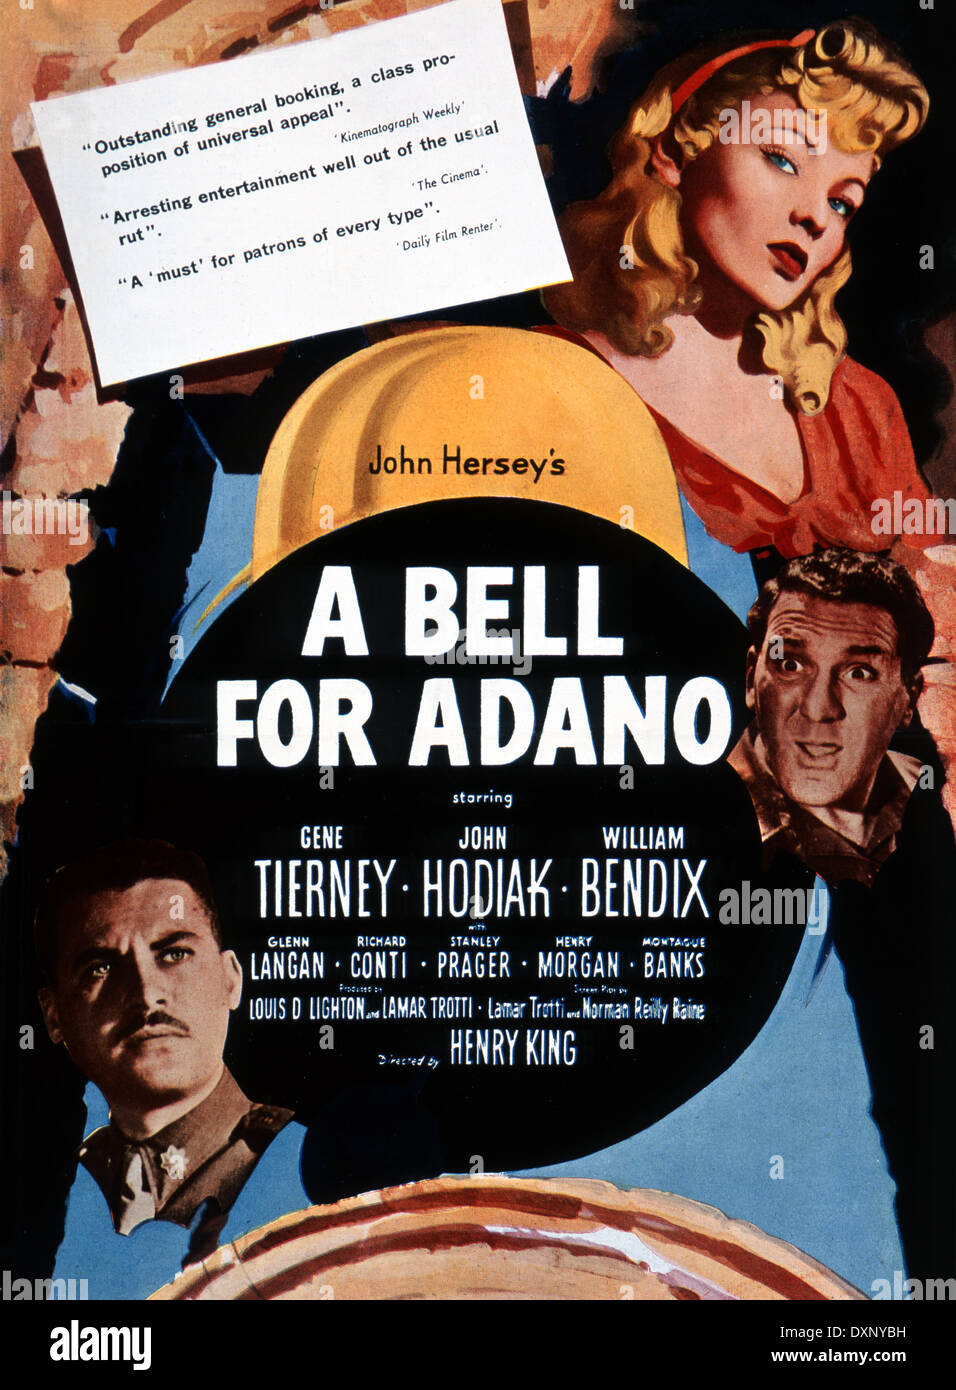 a bell for adano movie